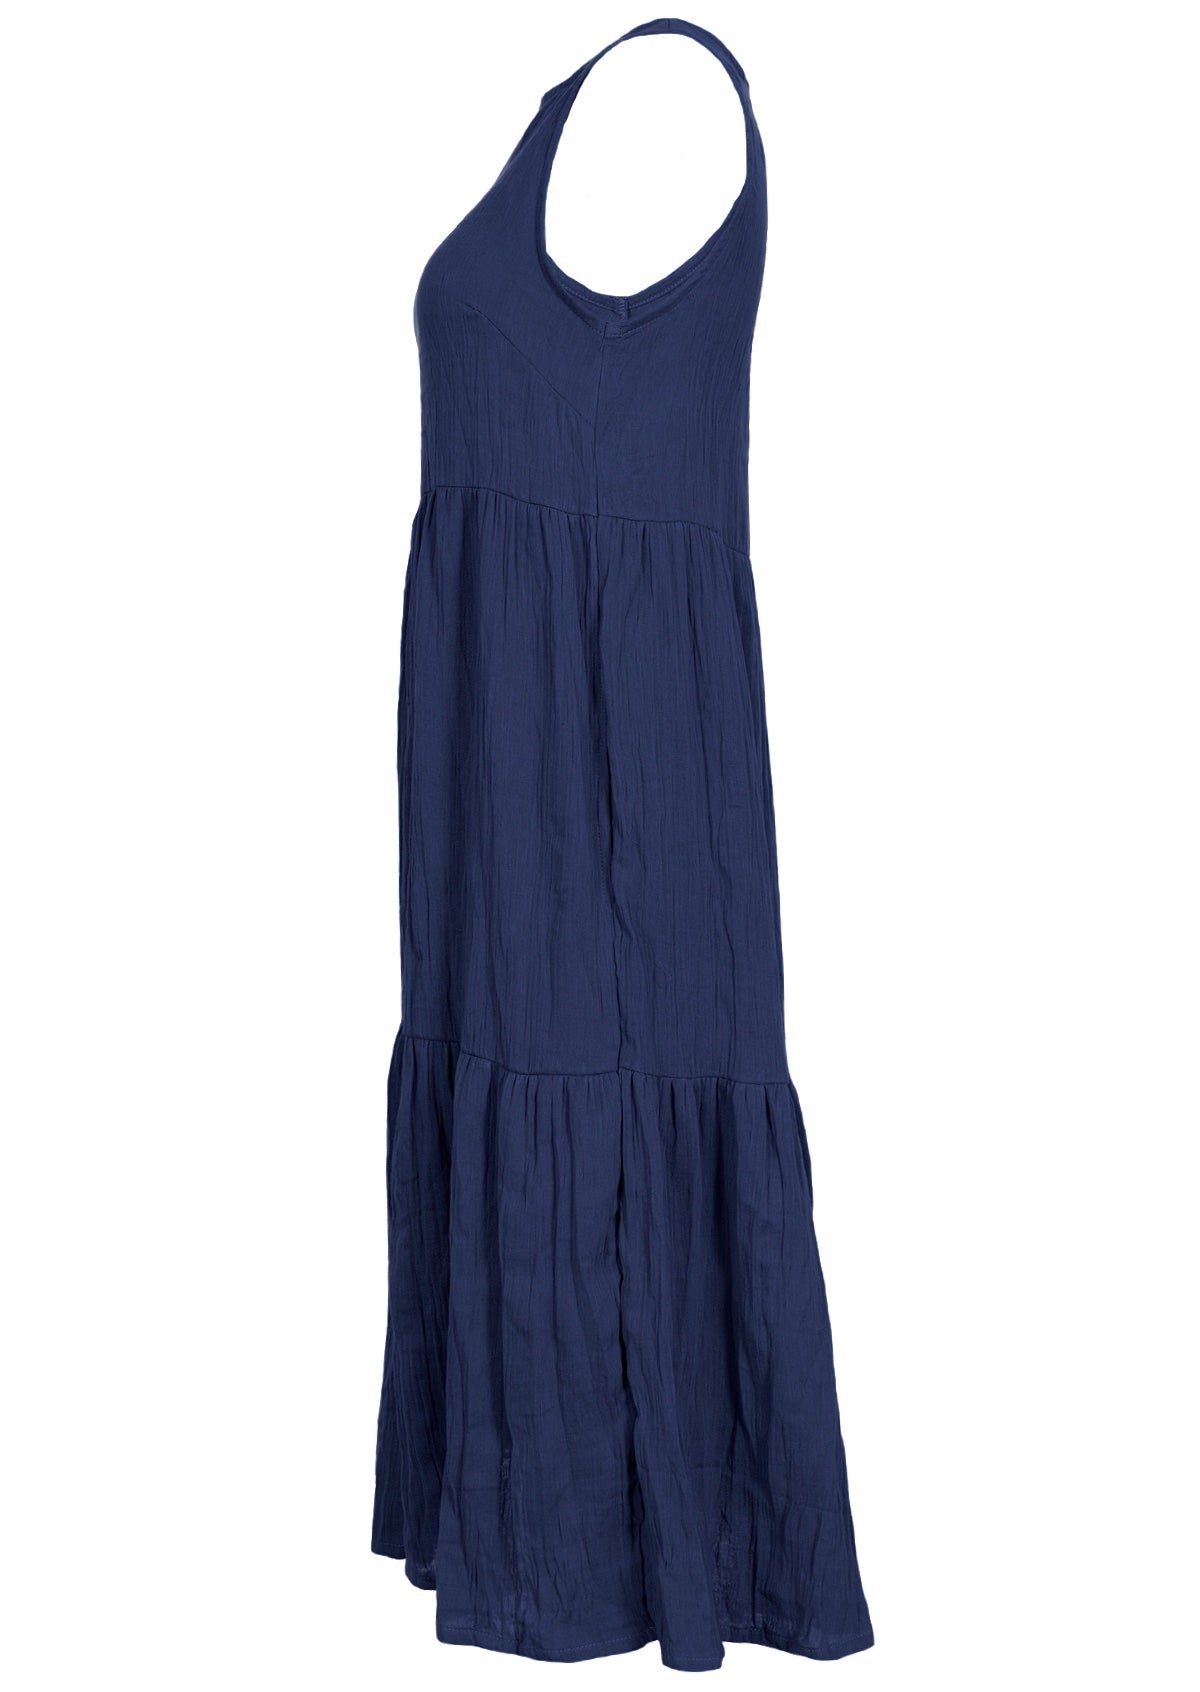 Lovely dark blue double cotton dress with hidden side pockets